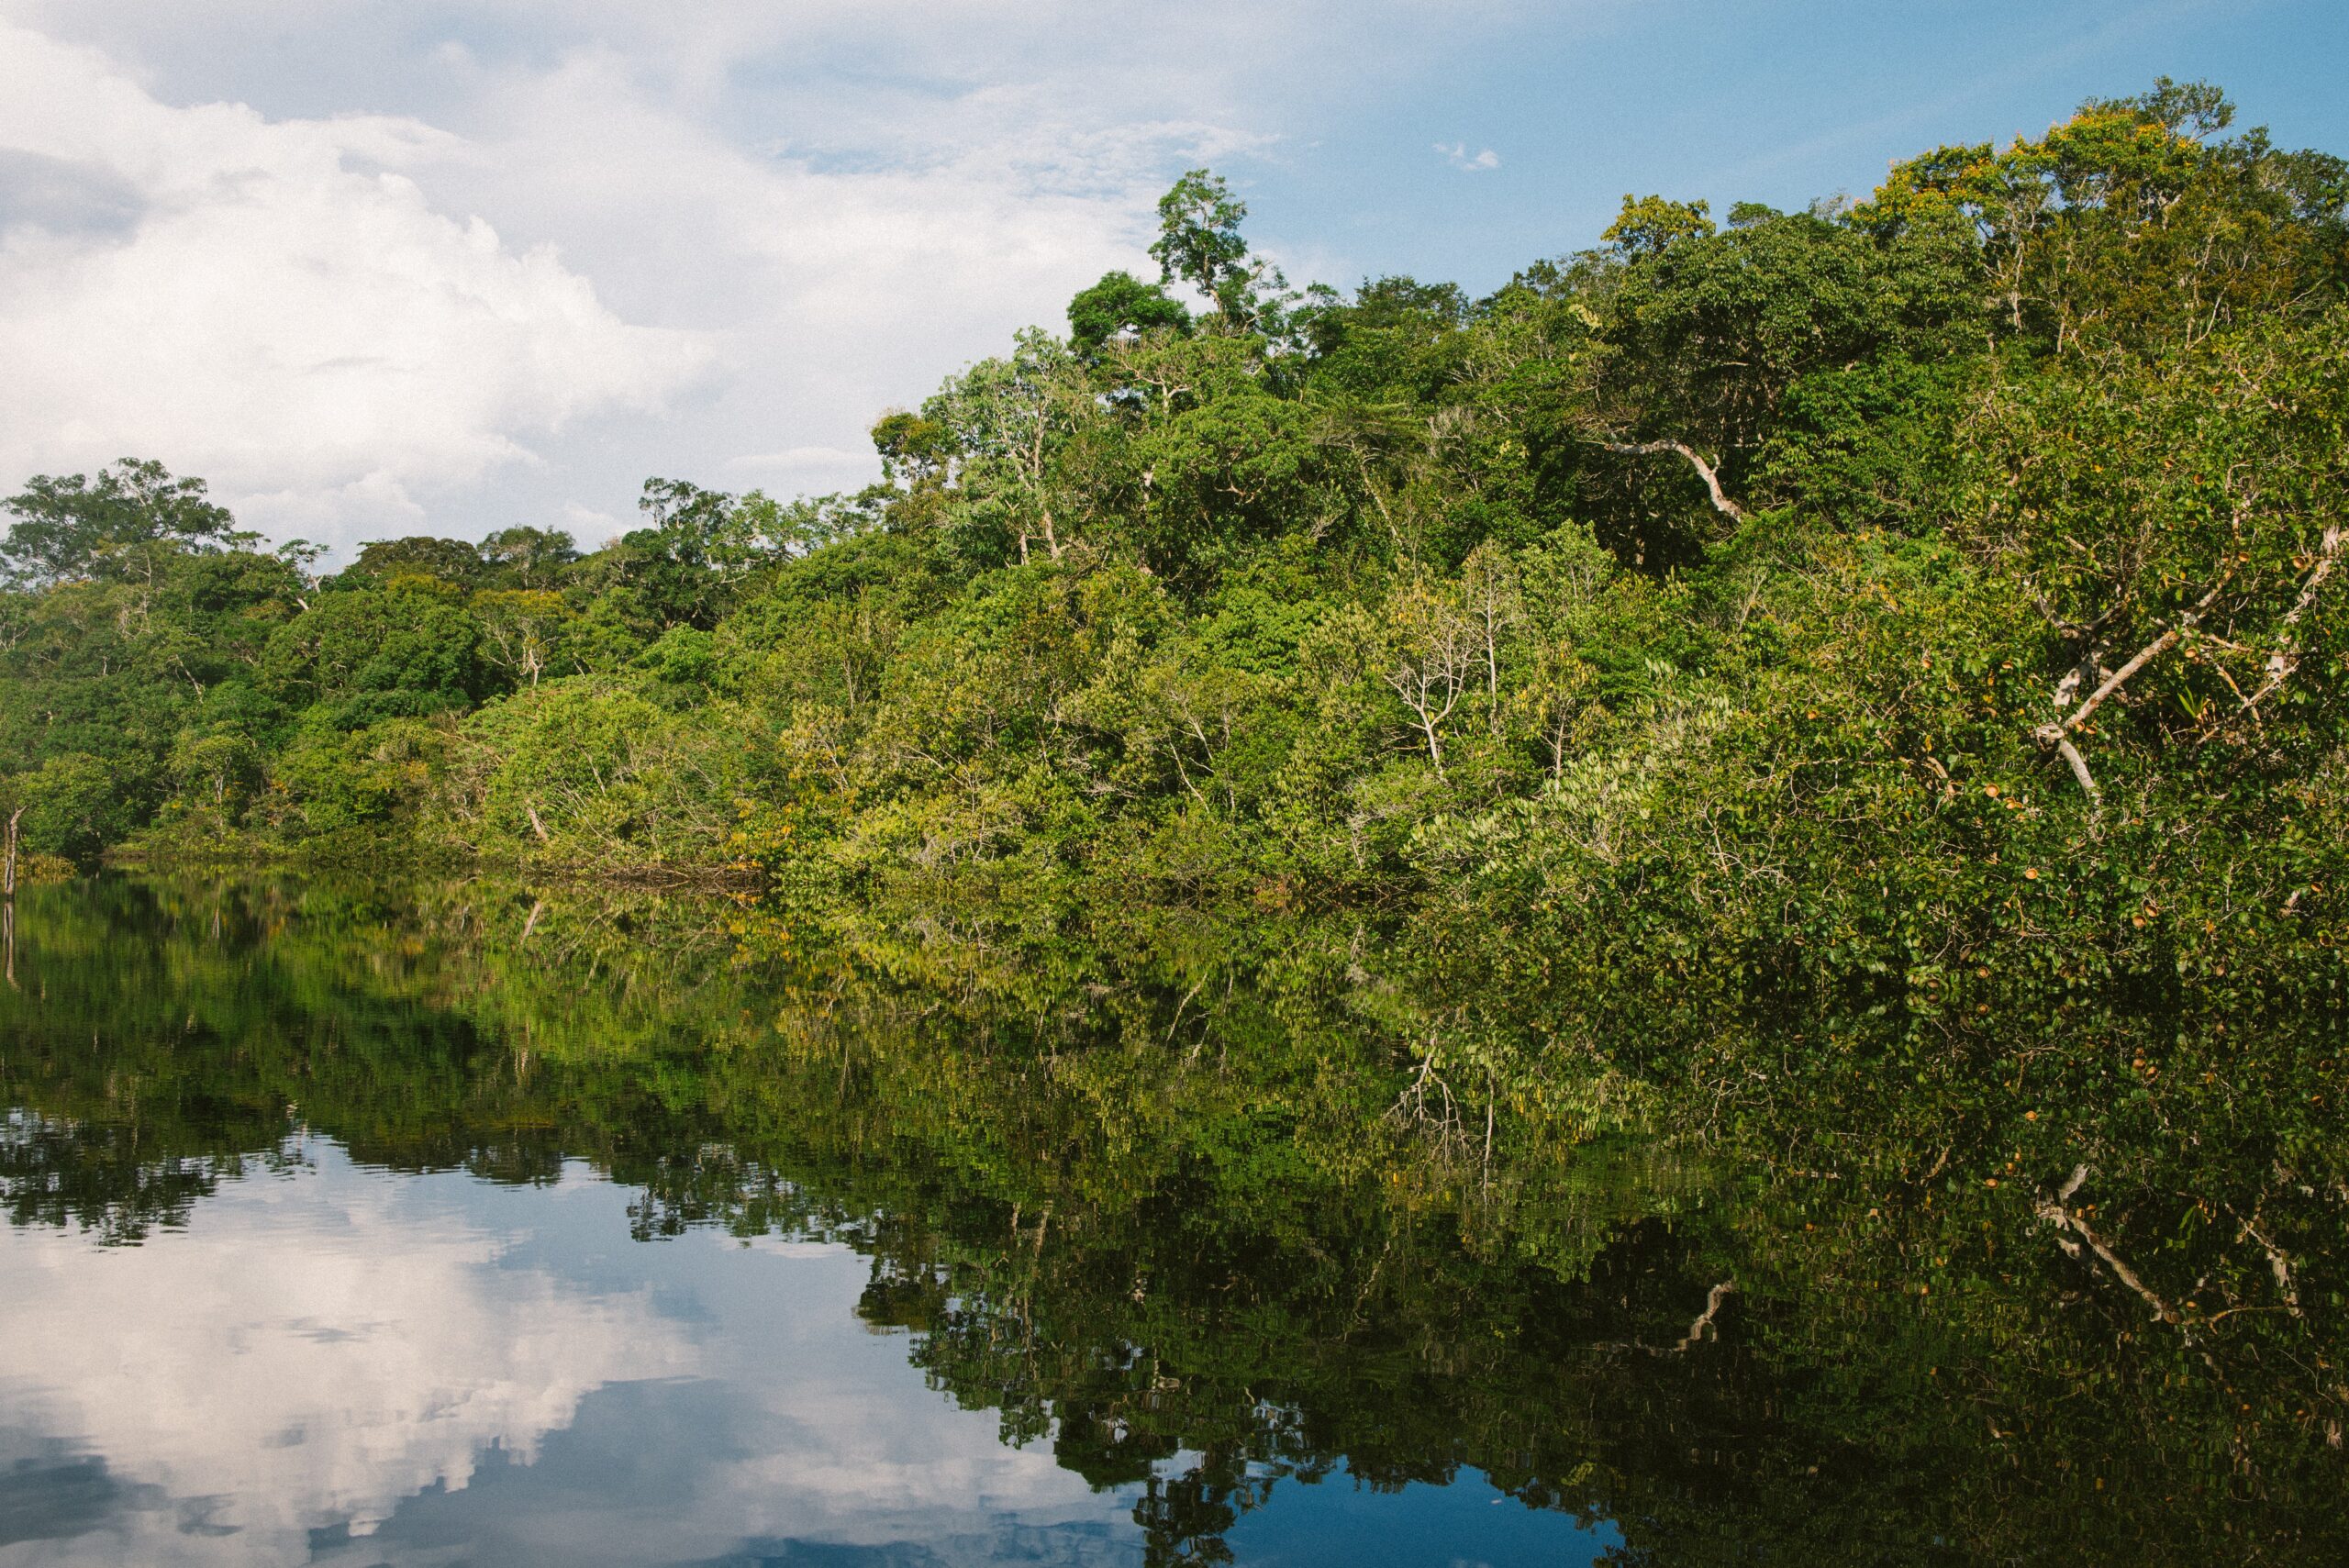 The Amazon is on the brink of a climate change tipping point